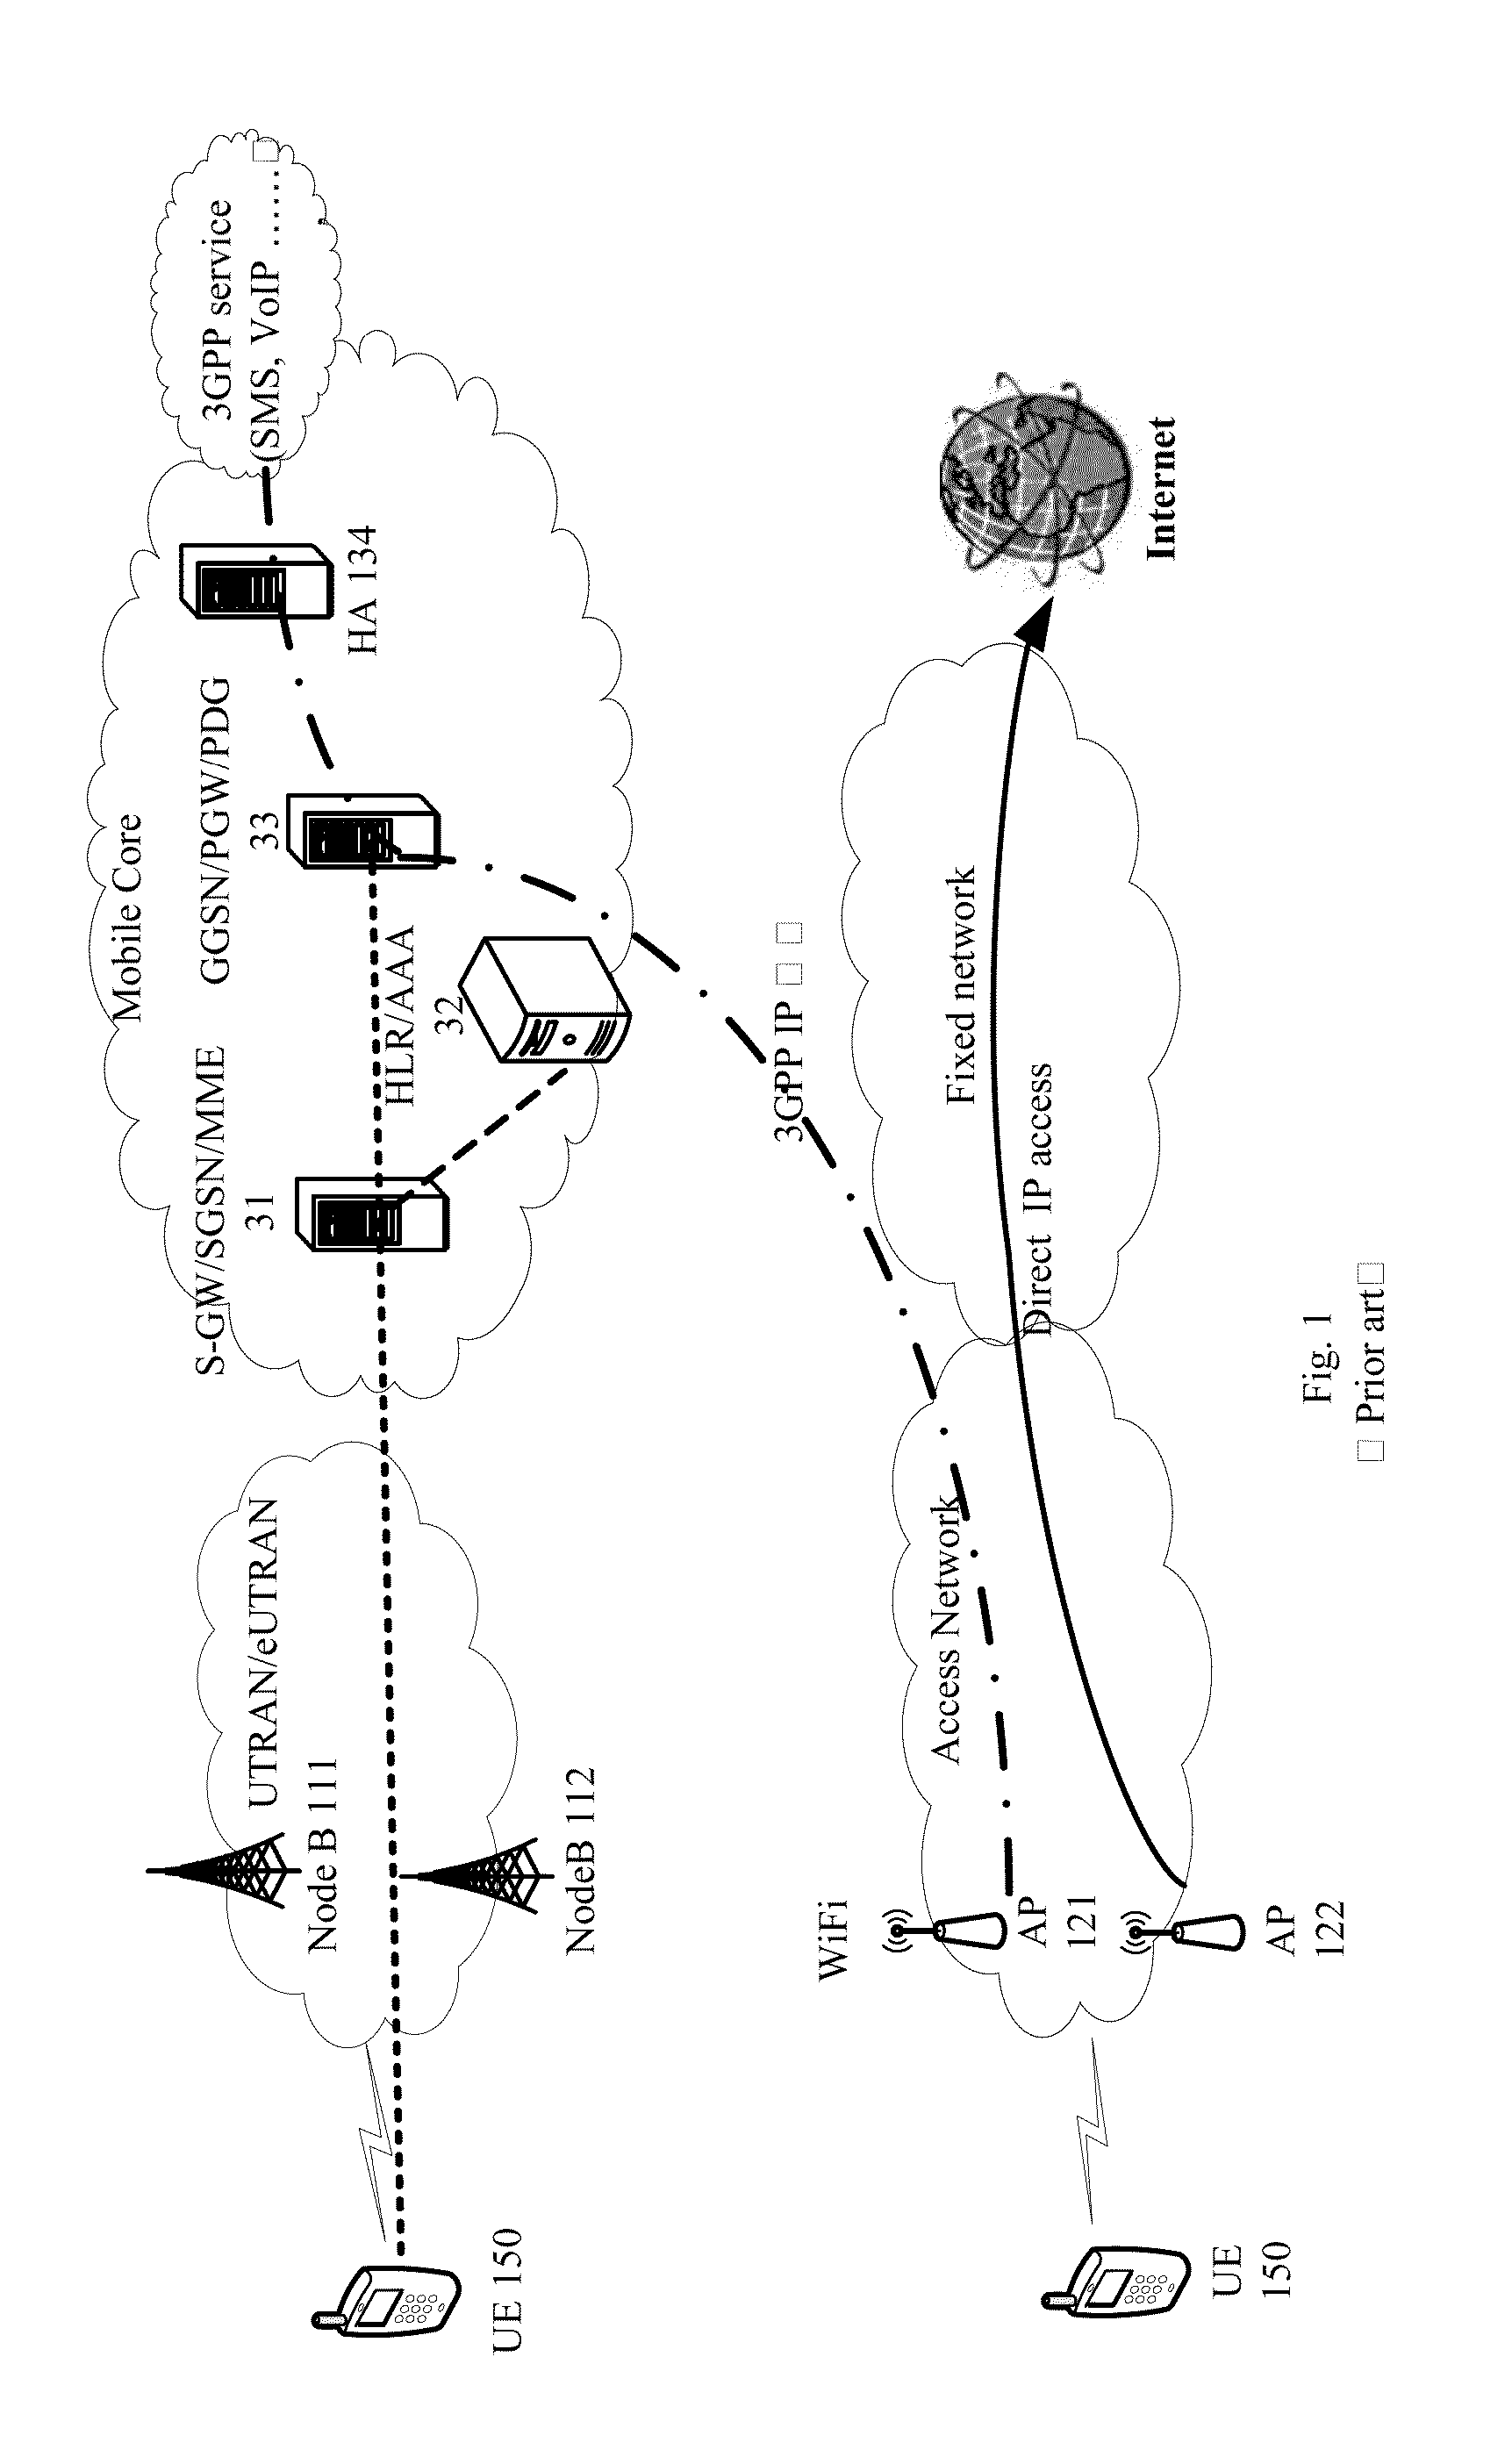 Method of communication under network condition converging cellular network and WLAN